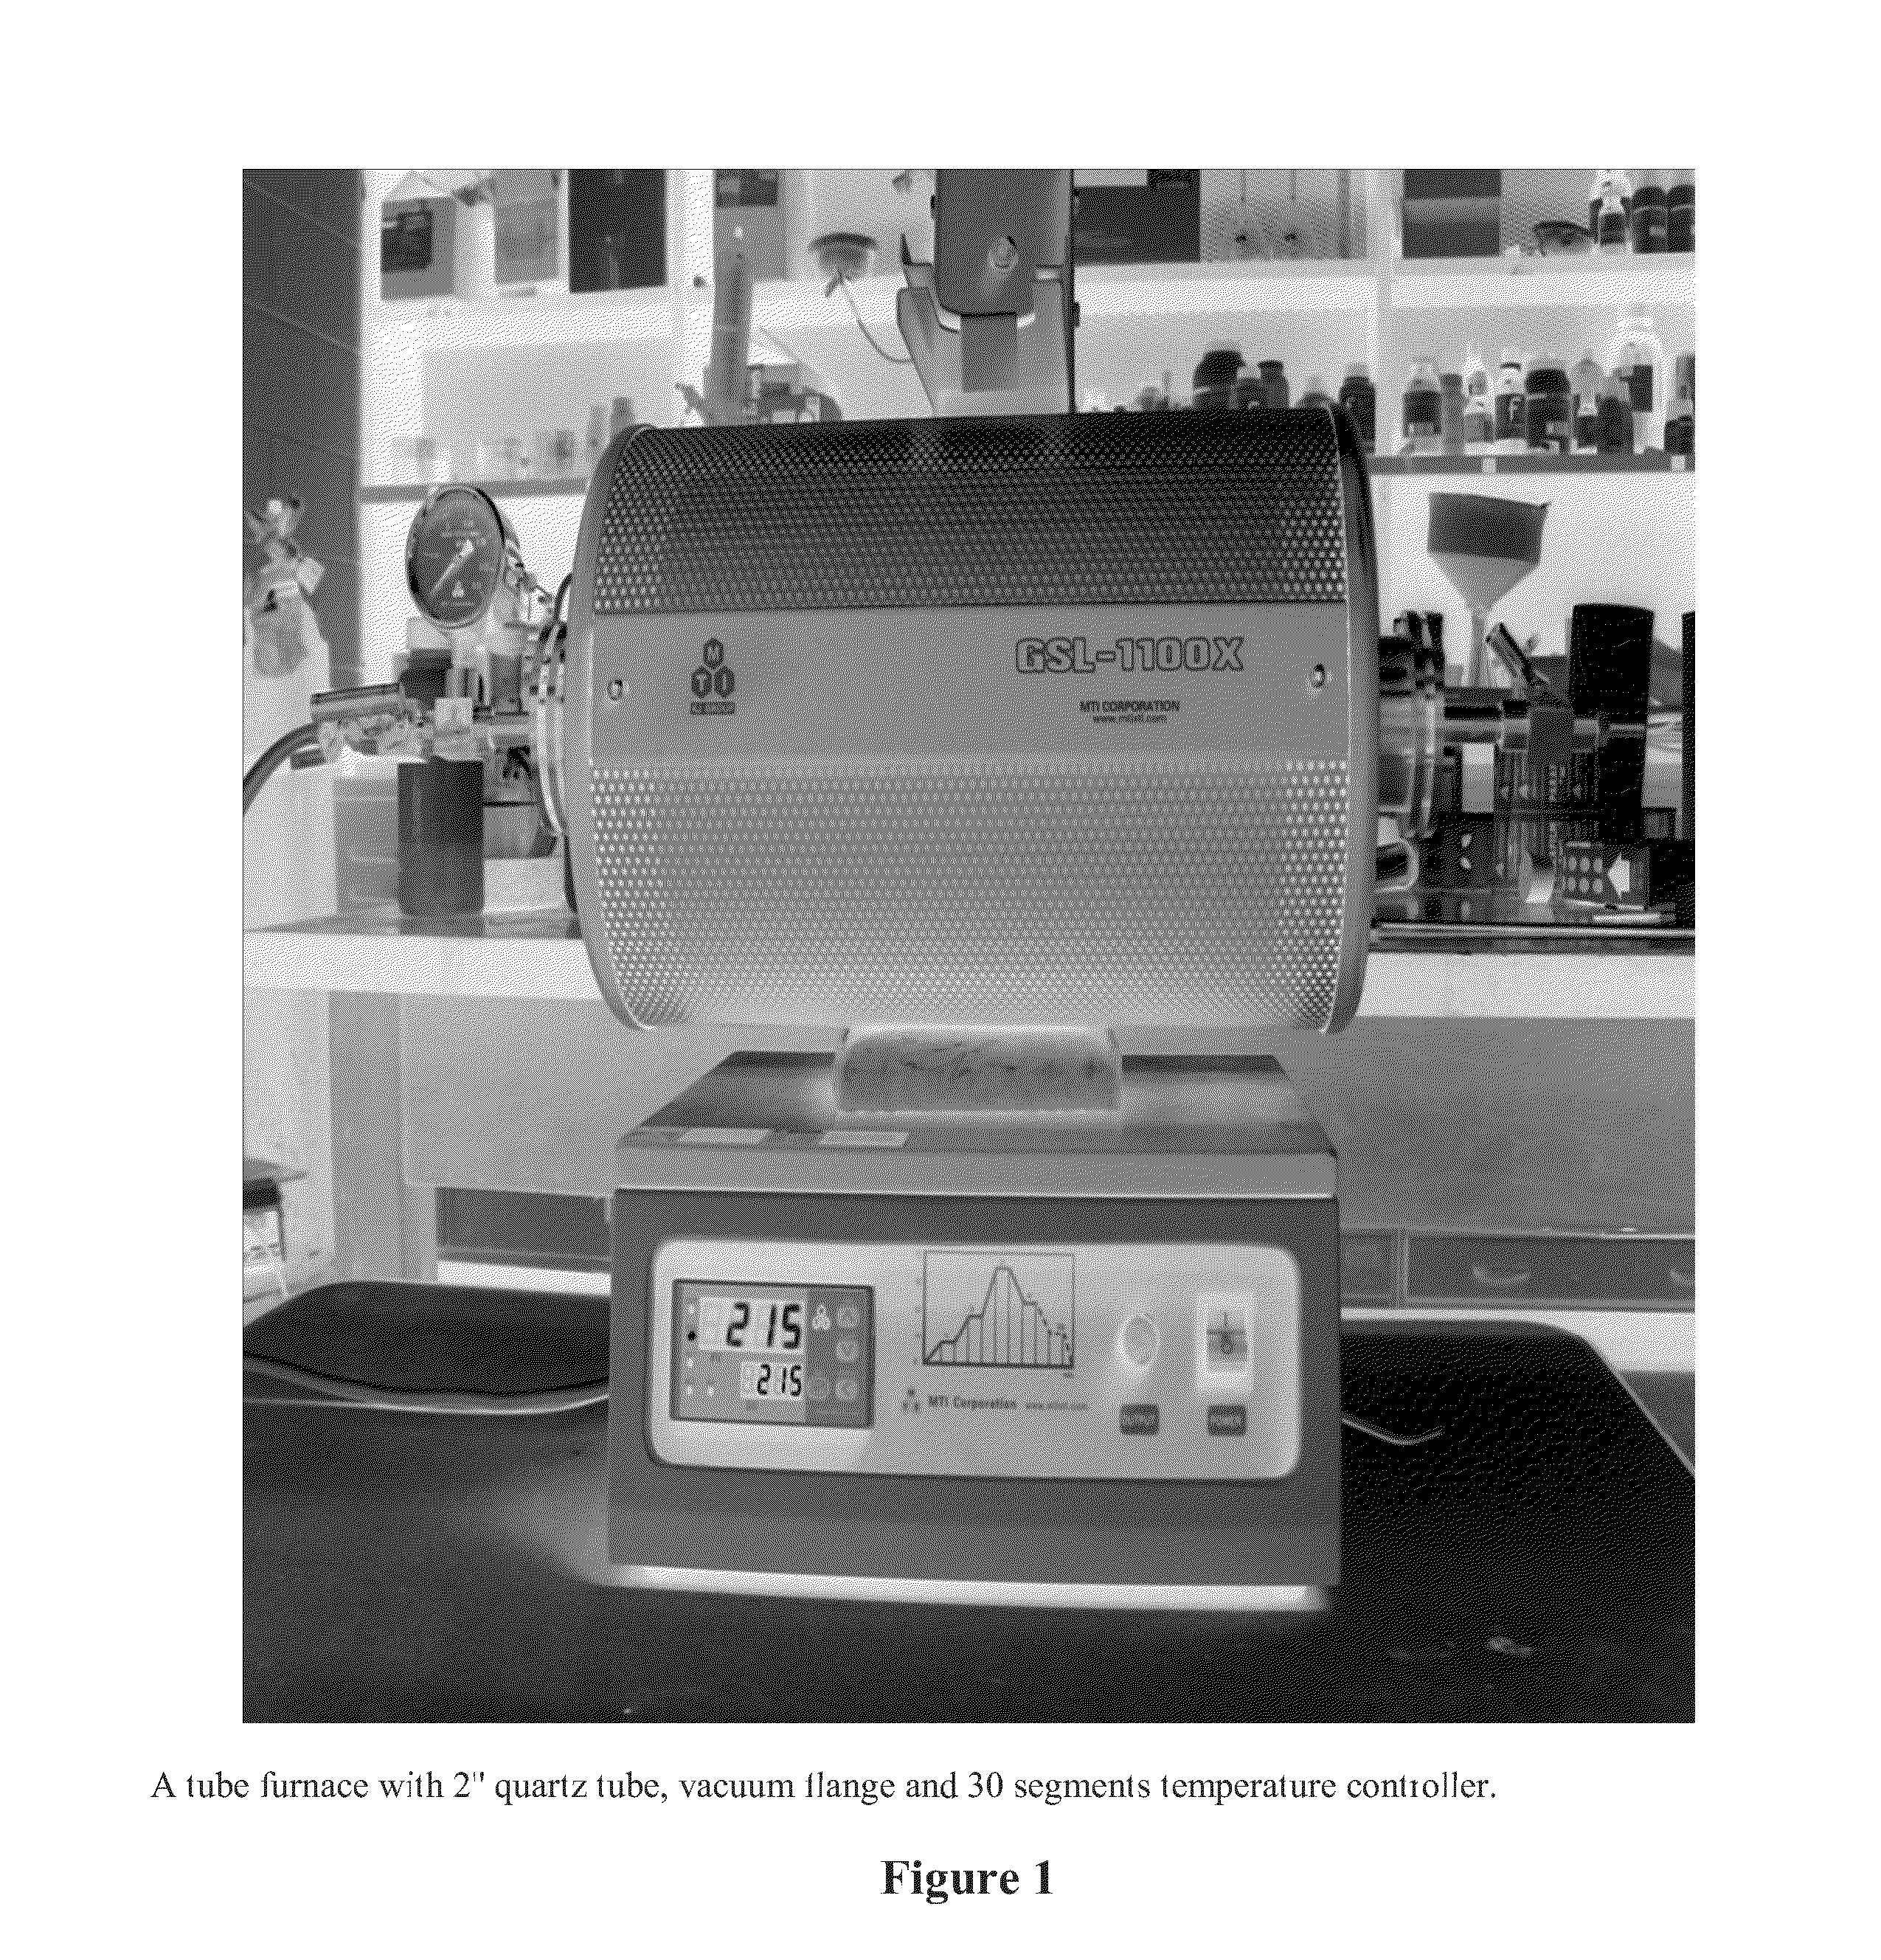 Graphene-like nanosheet structure network on a substrate and the method for forming the same